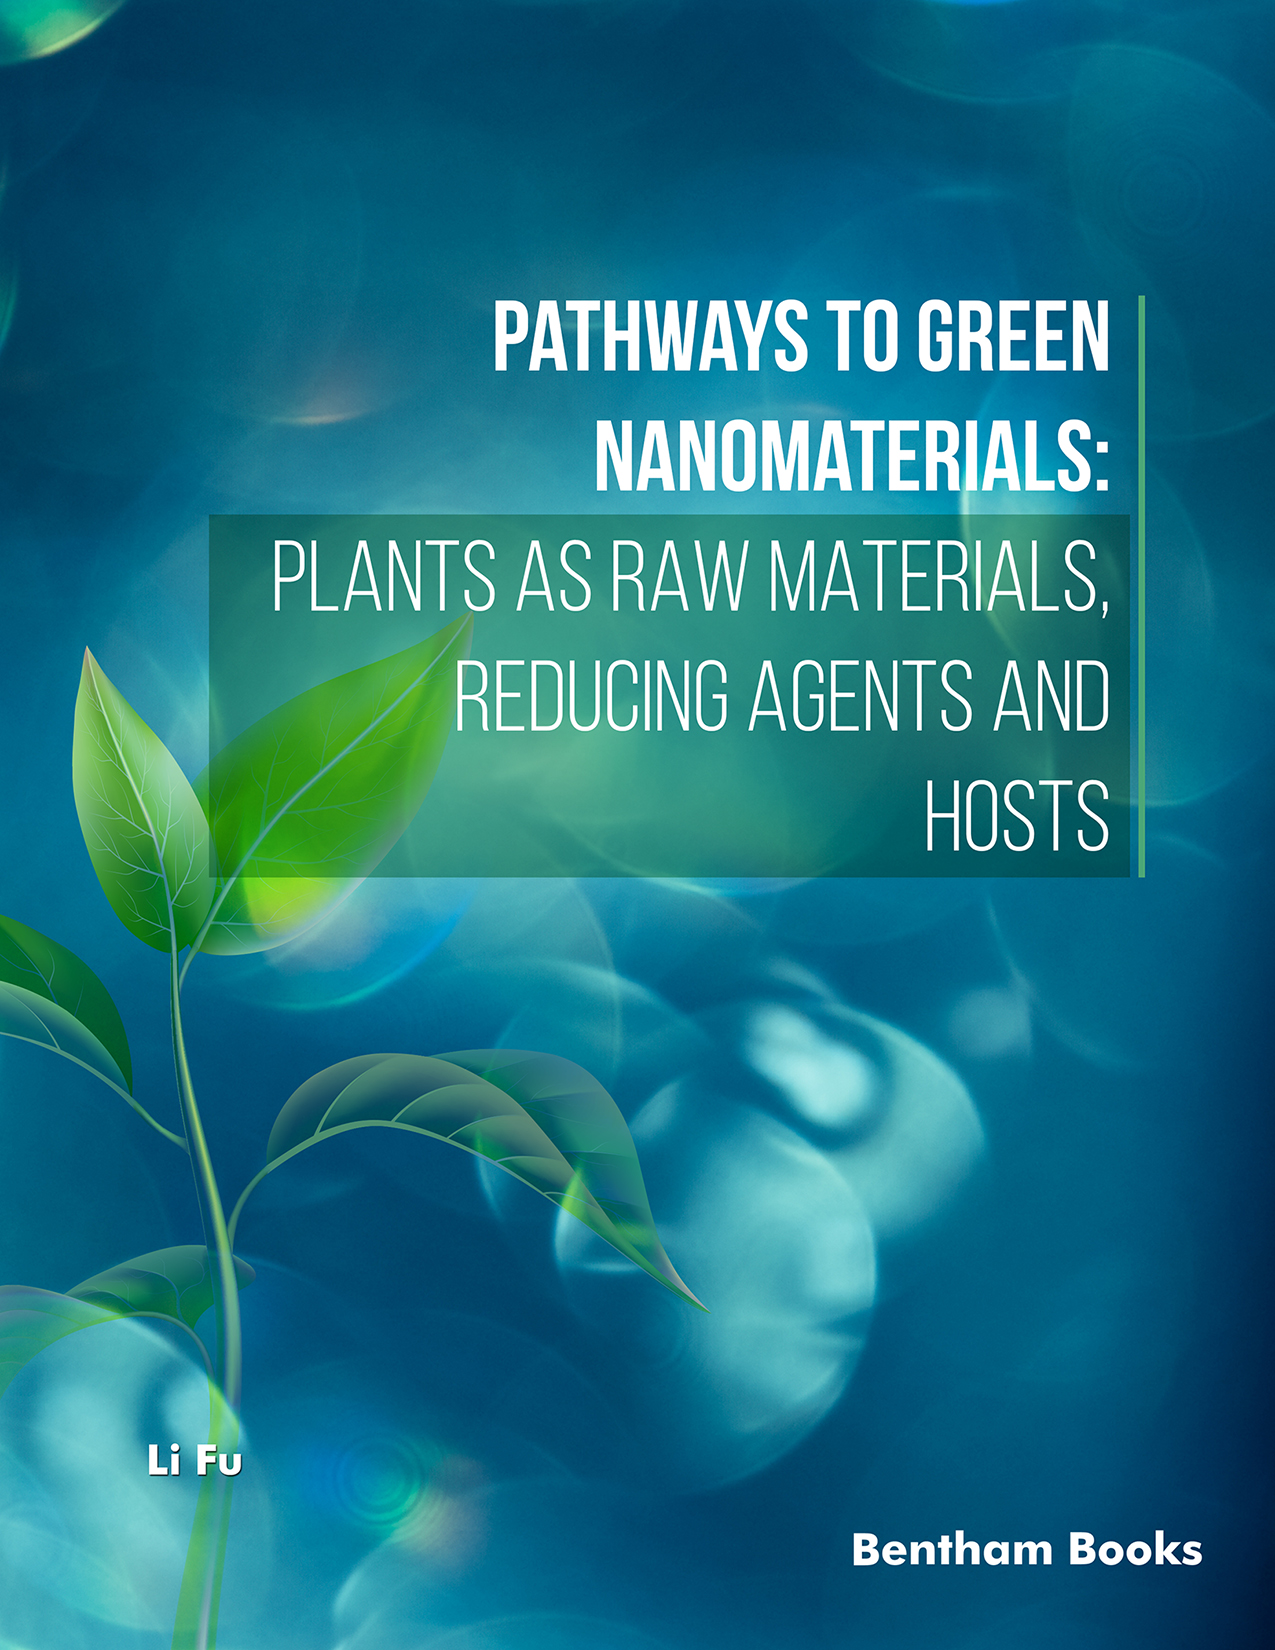 Pathways to Green Nanomaterials: Plants as Raw Materials, Reducing Agents and Hosts